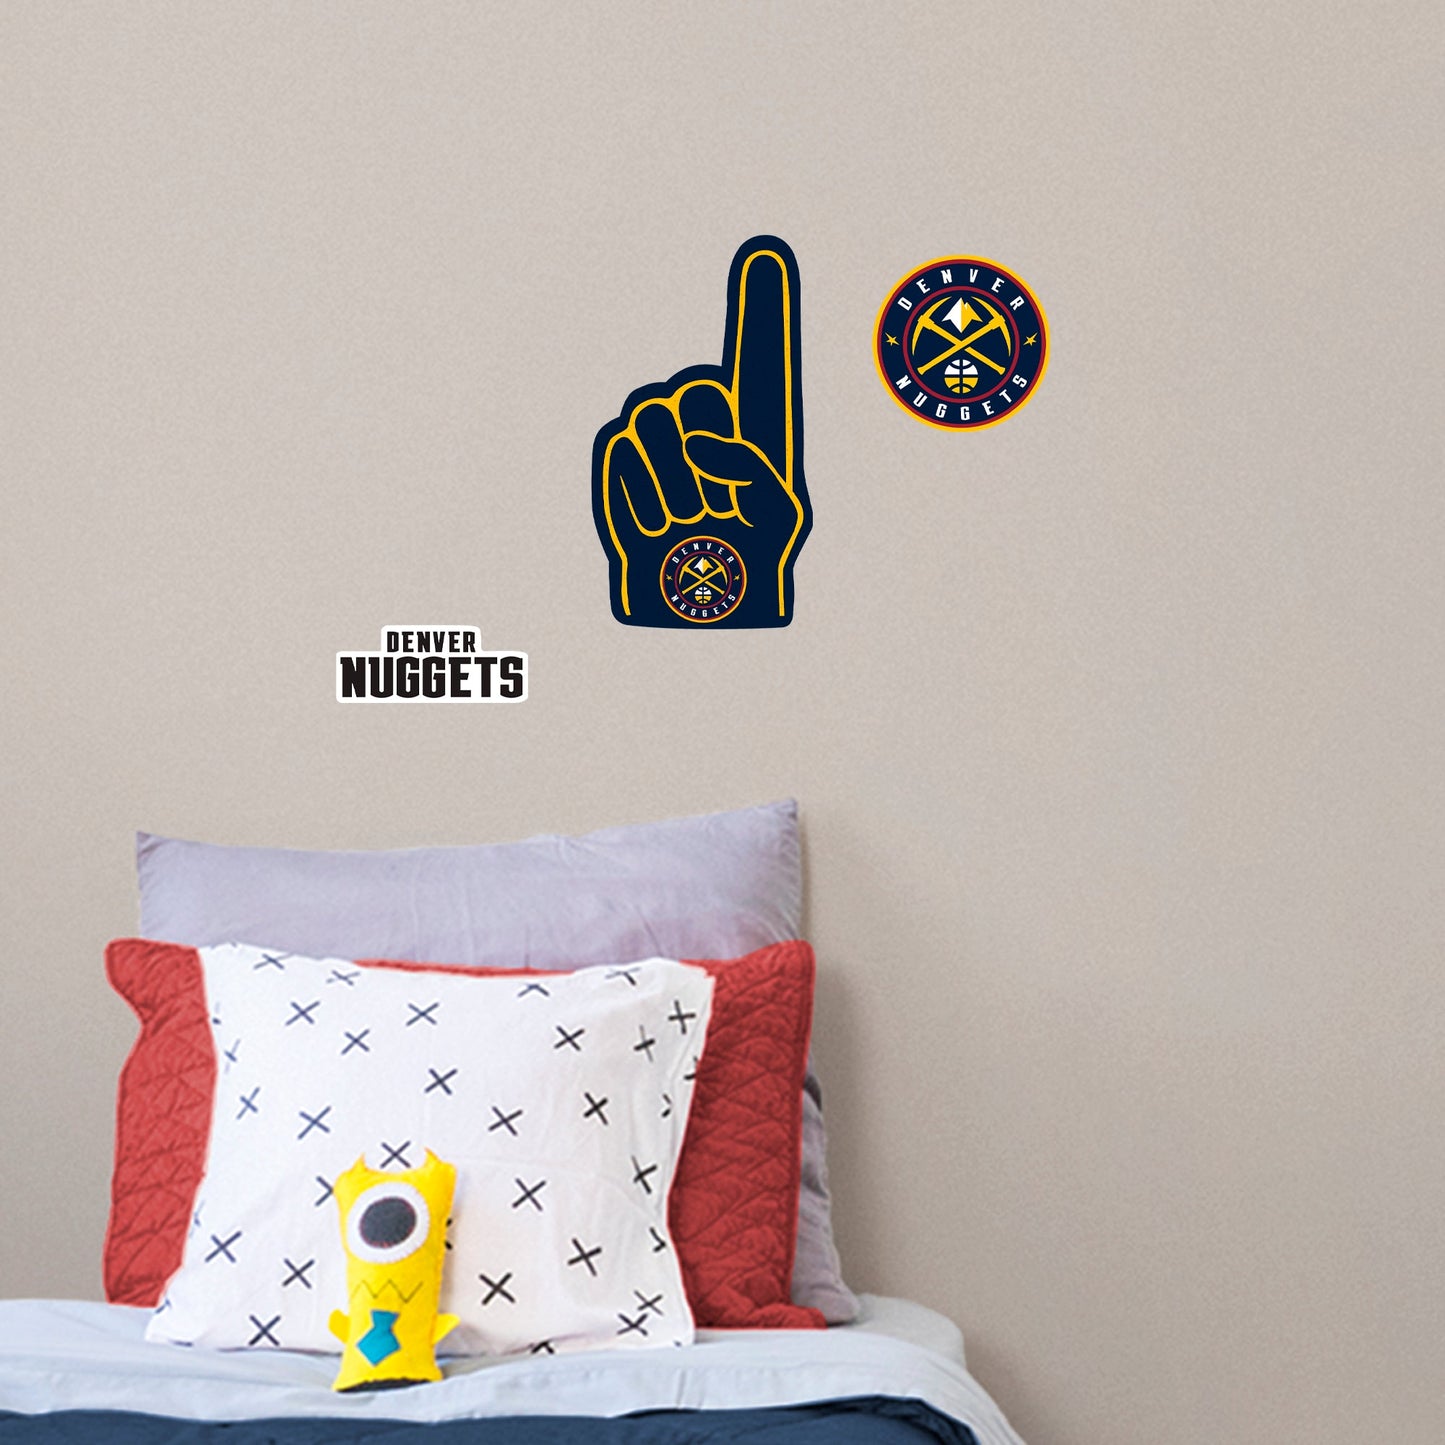 Denver Nuggets: Foam Finger - Officially Licensed NBA Removable Adhesive Decal